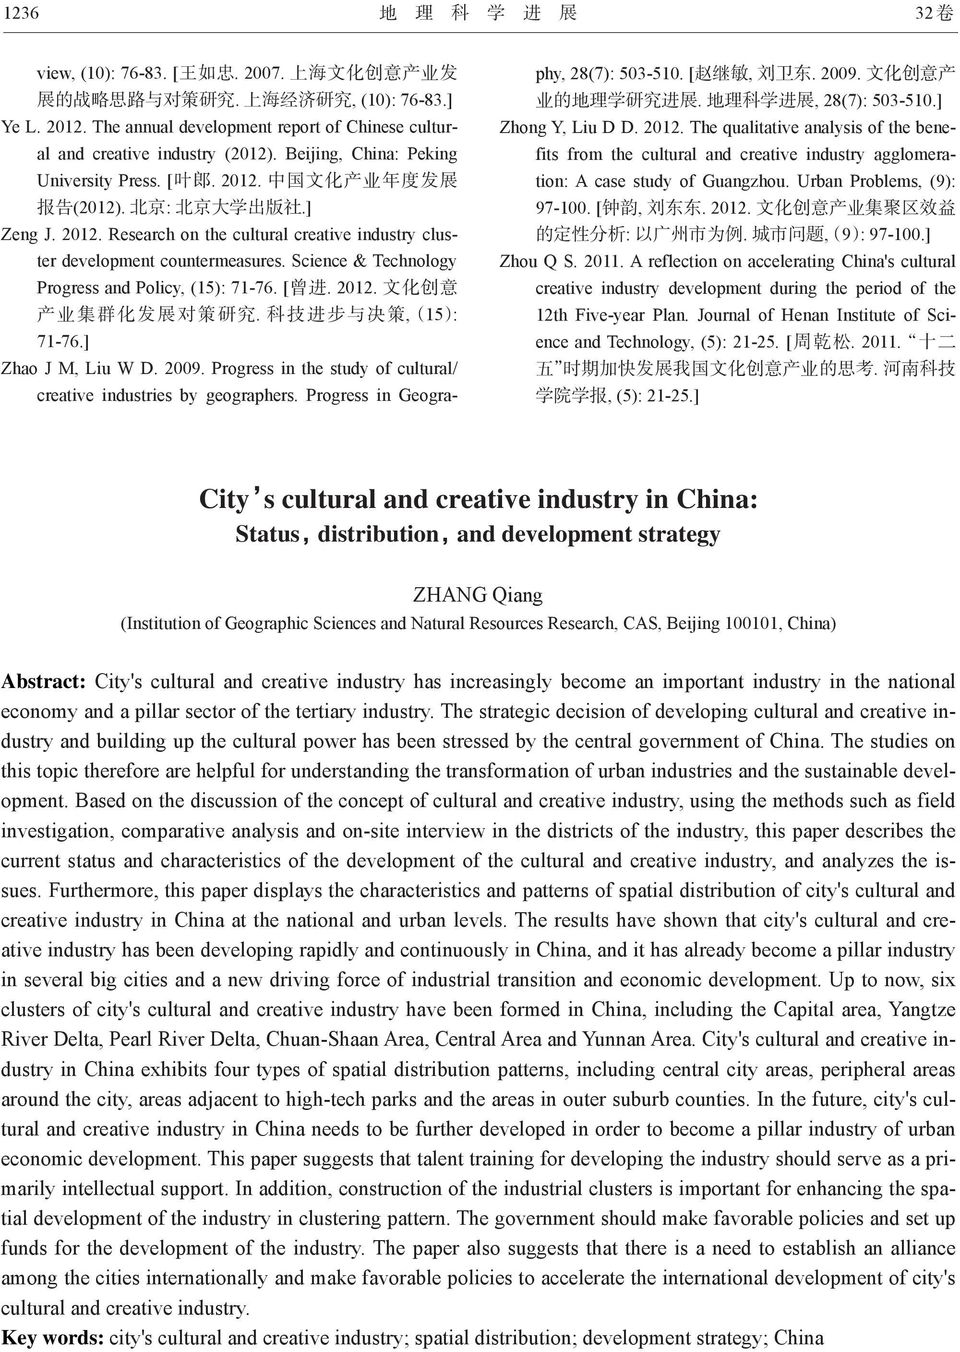 2012. Research on the cultural creative industry cluster development countermeasures. Science & Technology Progress and Policy, (15): 71-76. [ 曾 进. 2012. 文 化 创 意 产 业 集 群 化 发 展 对 策 研 究.